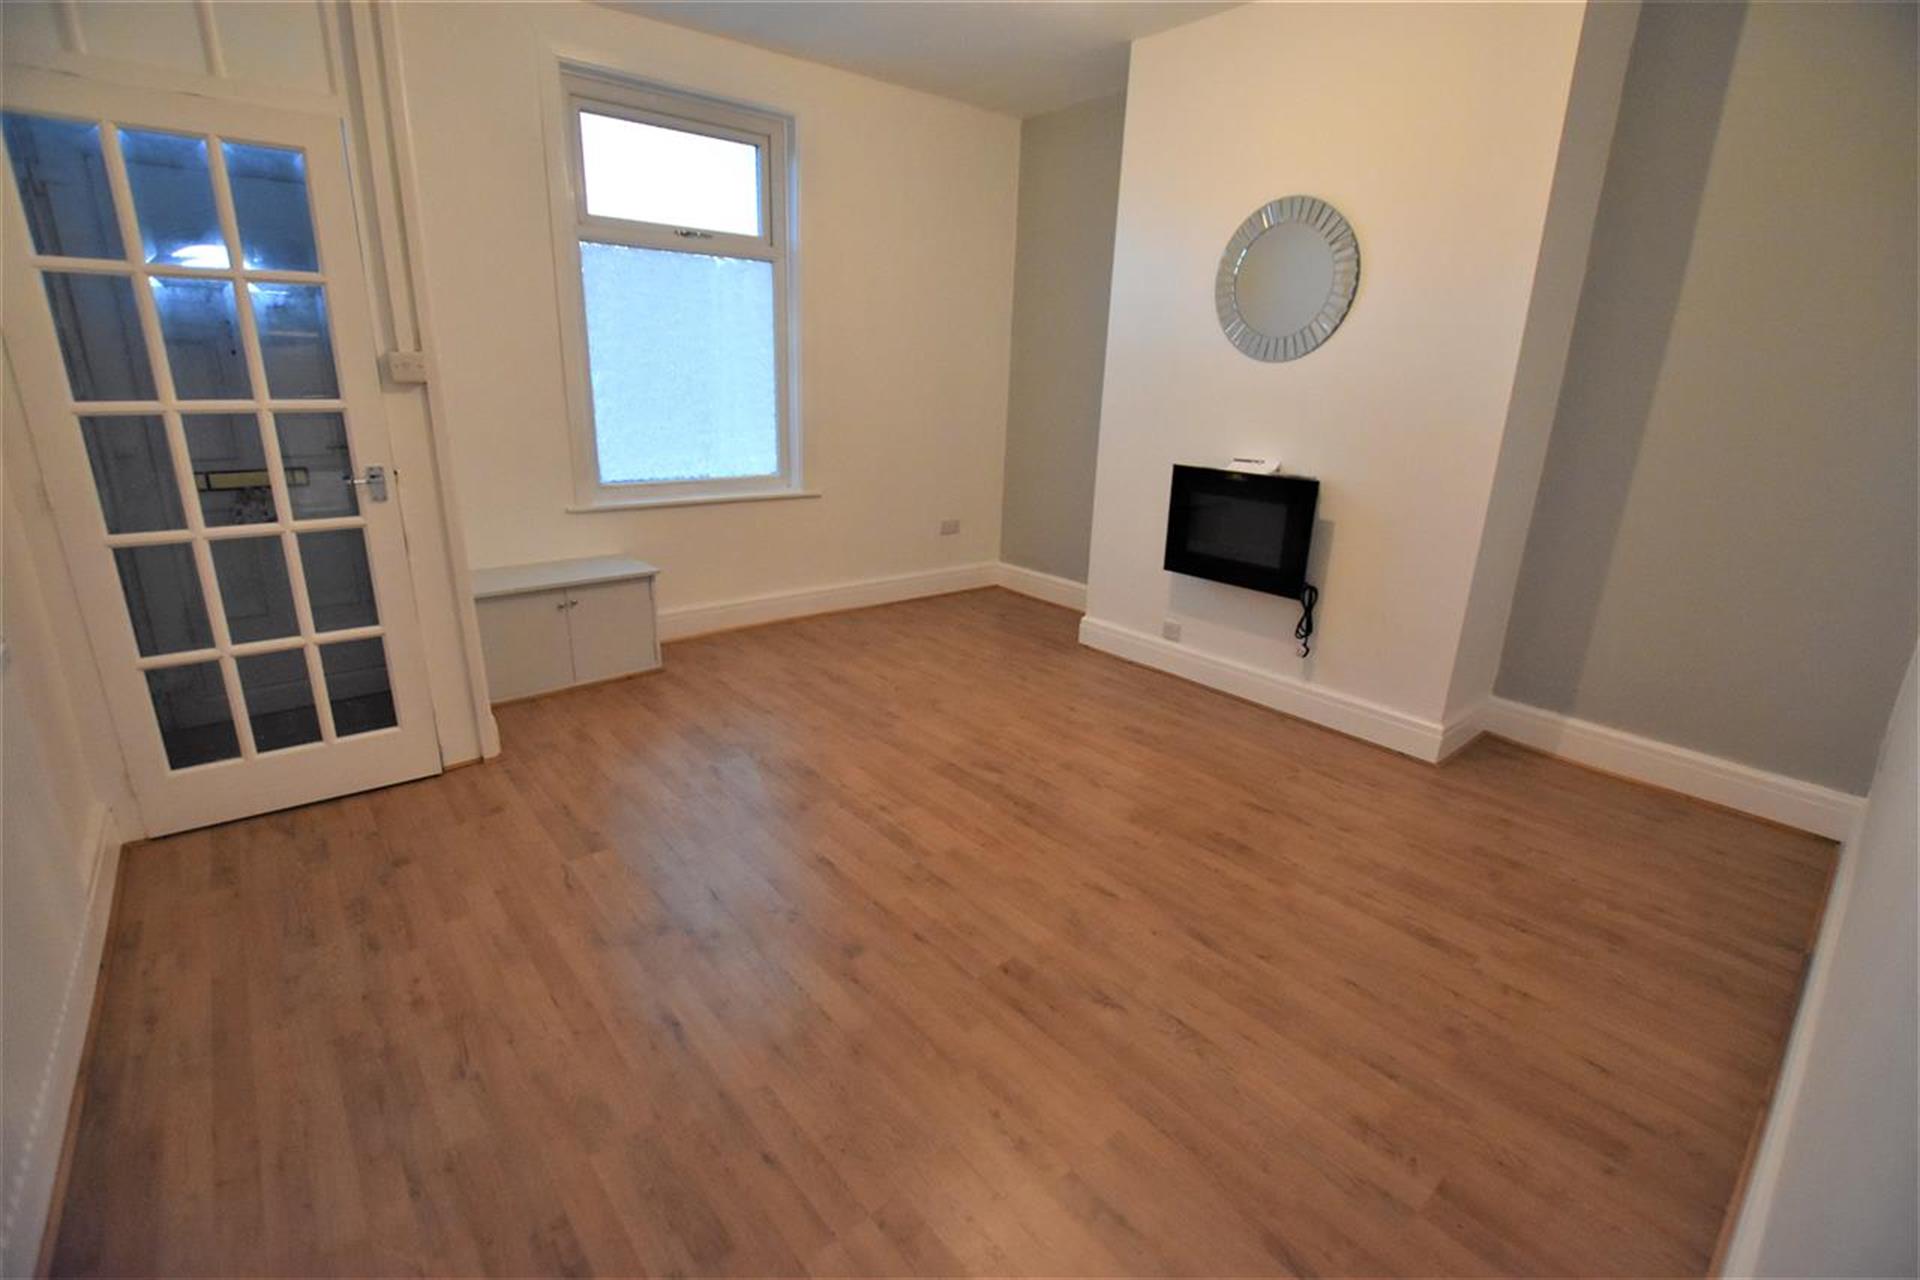 2 Bedroom Terraced House To Rent - Reception Room 1